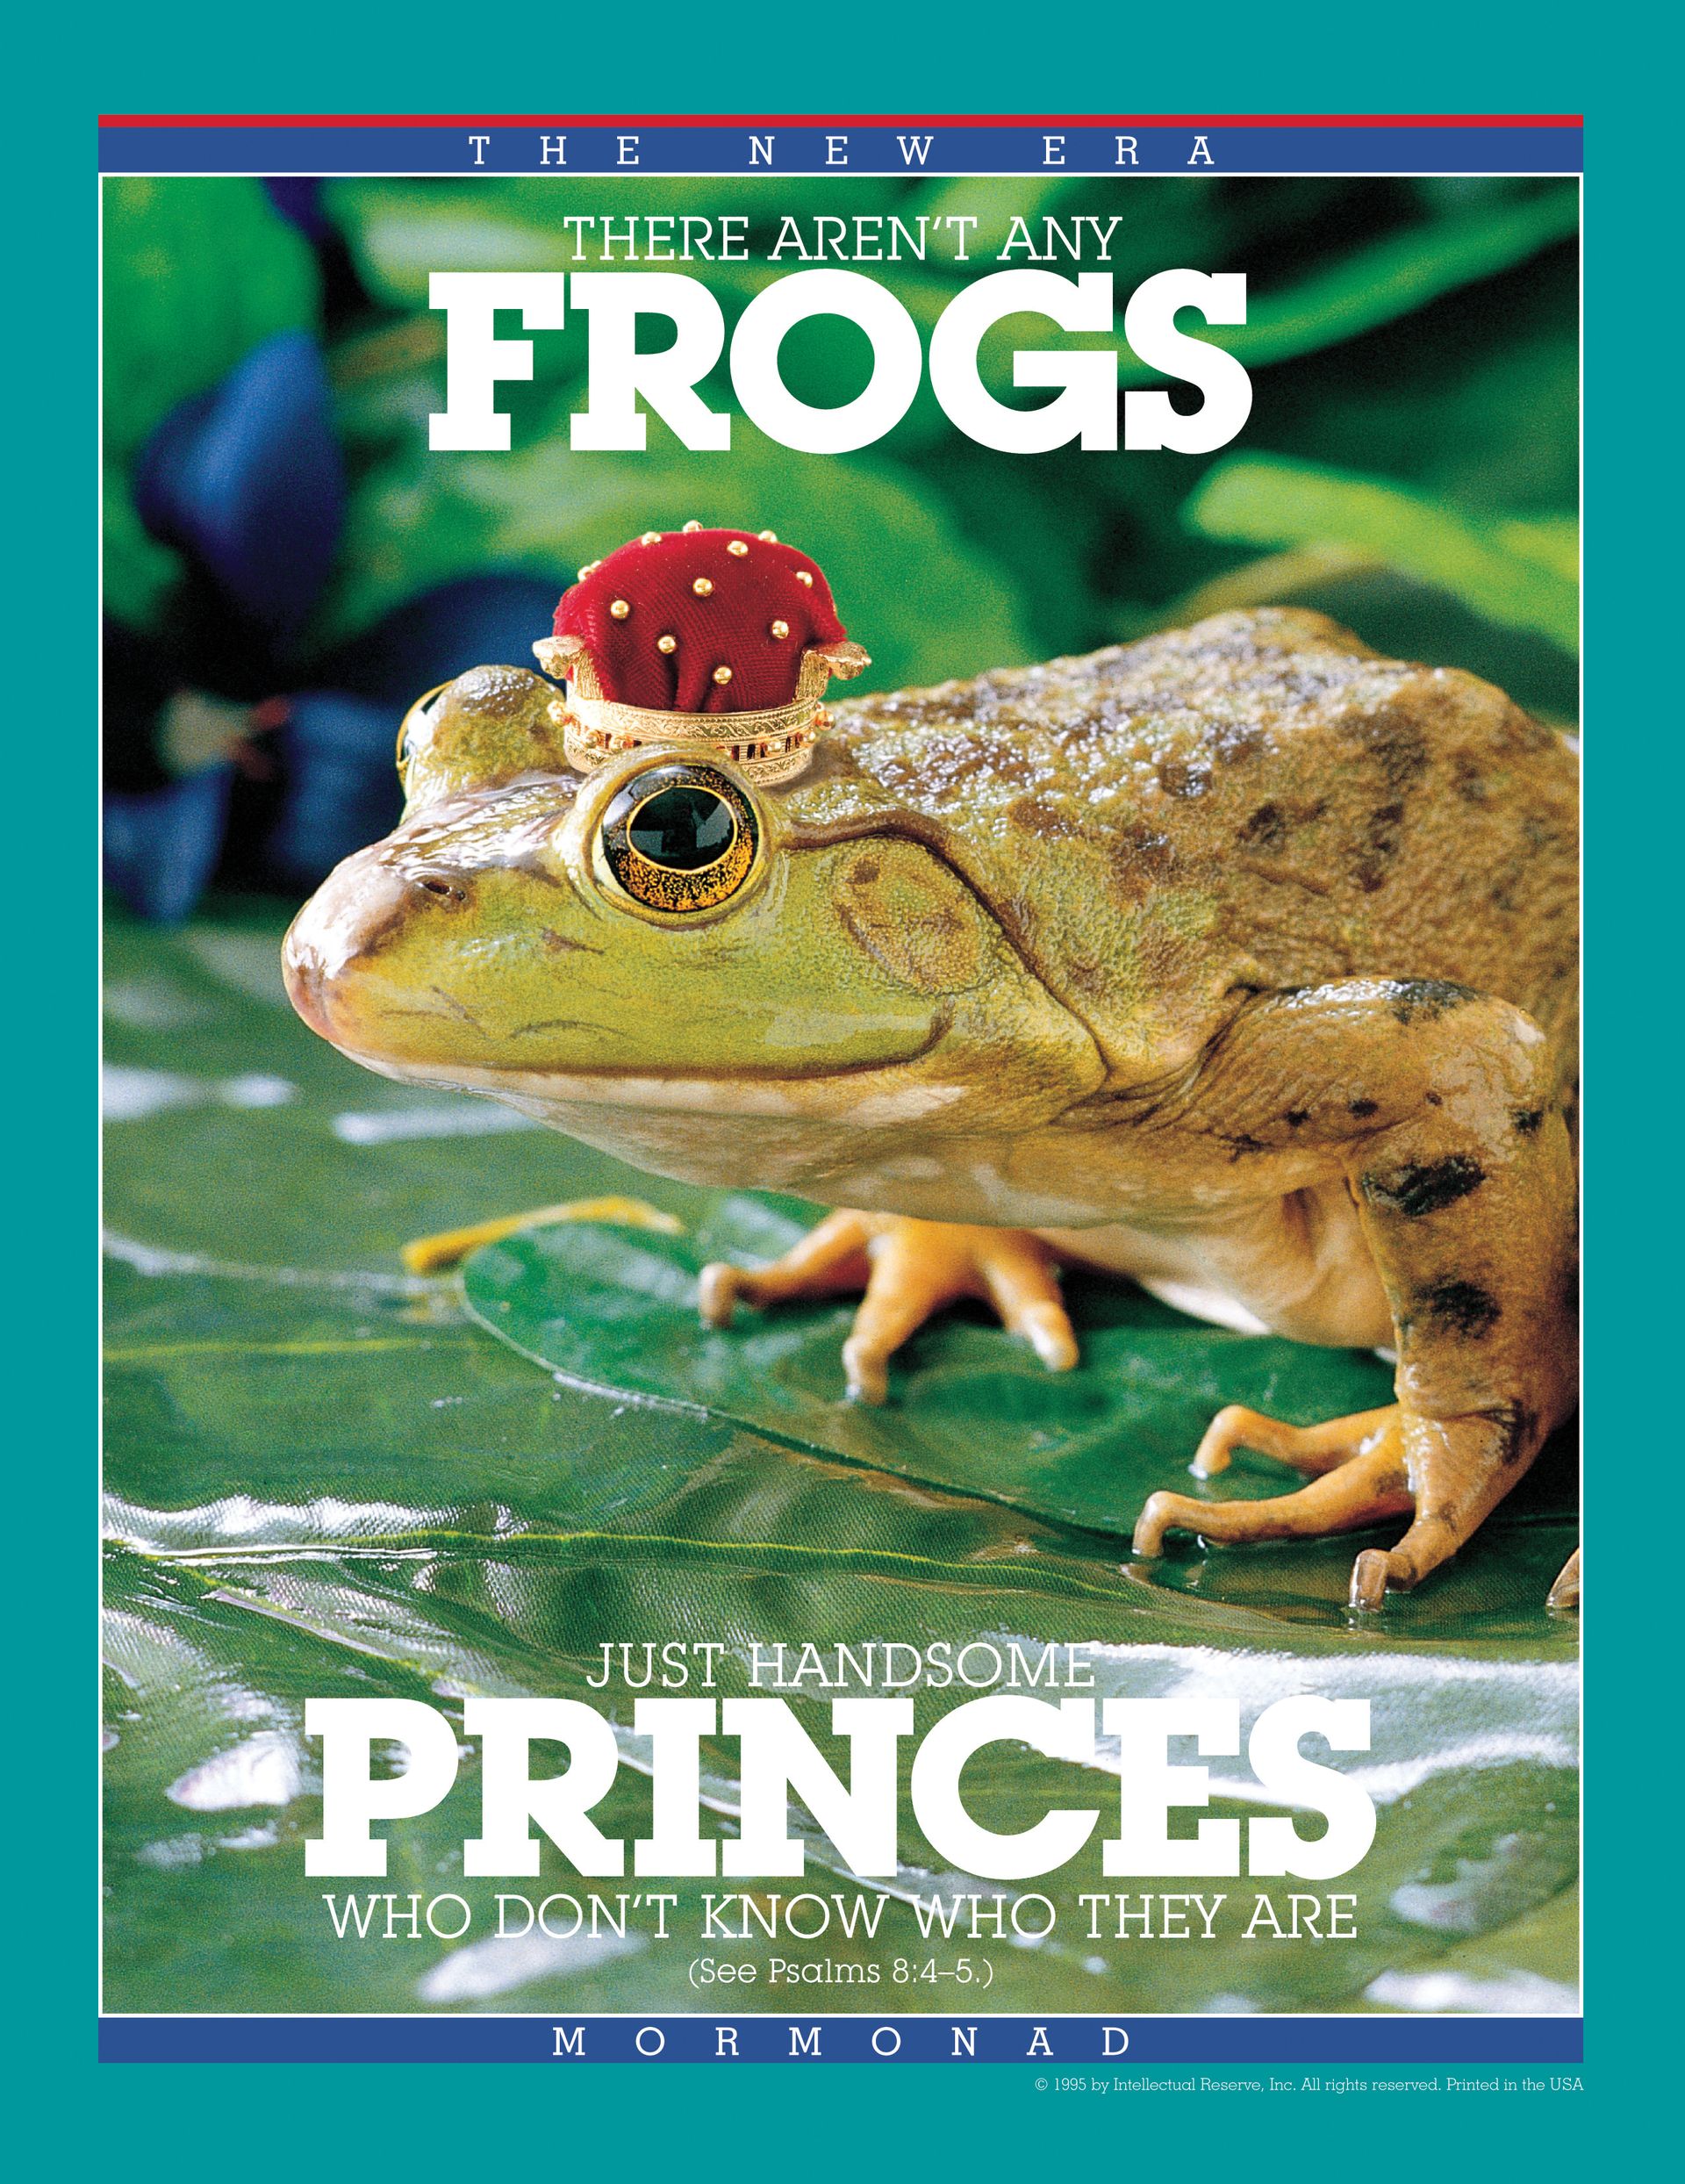 There Aren’t Any Frogs—Just Handsome Princes Who Don't Know Who They Are. (See Psalms 8:4–5.) Sept. 1988 © undefined ipCode 1.